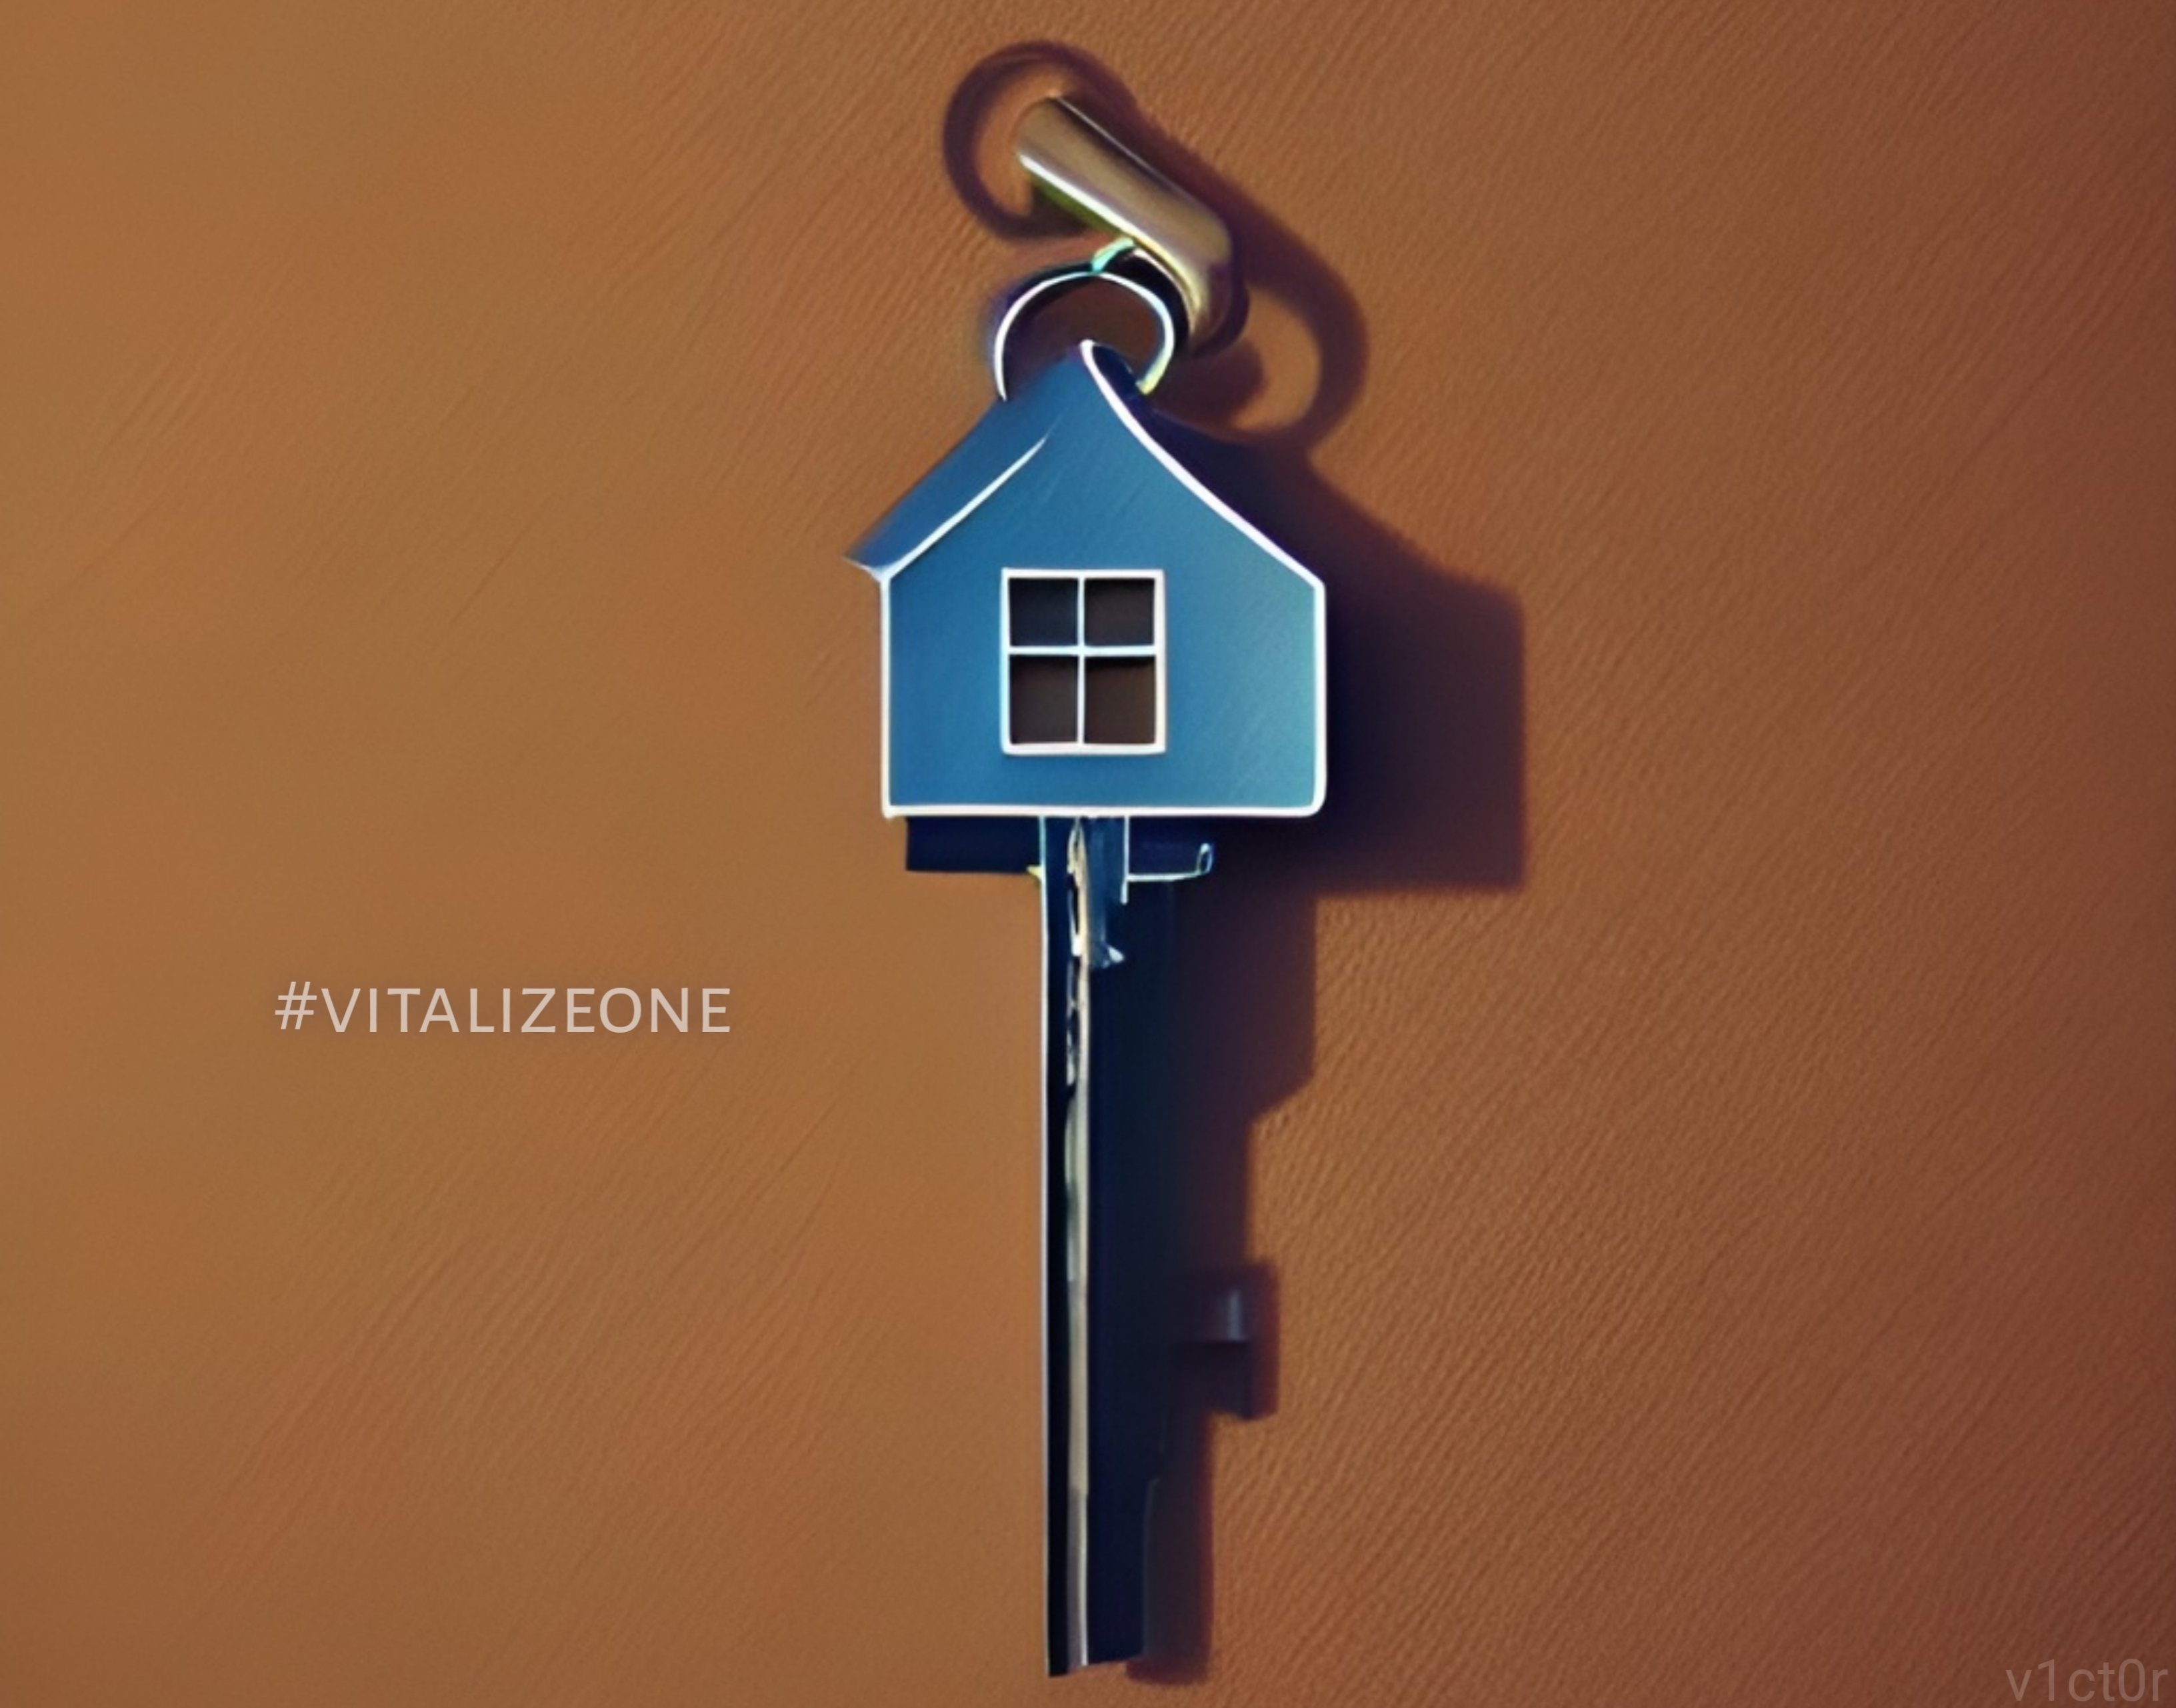 How To Become A Landlord In 10 Simple Steps NFT by v1ct0r | VitalyTennant.com #vitalizeone